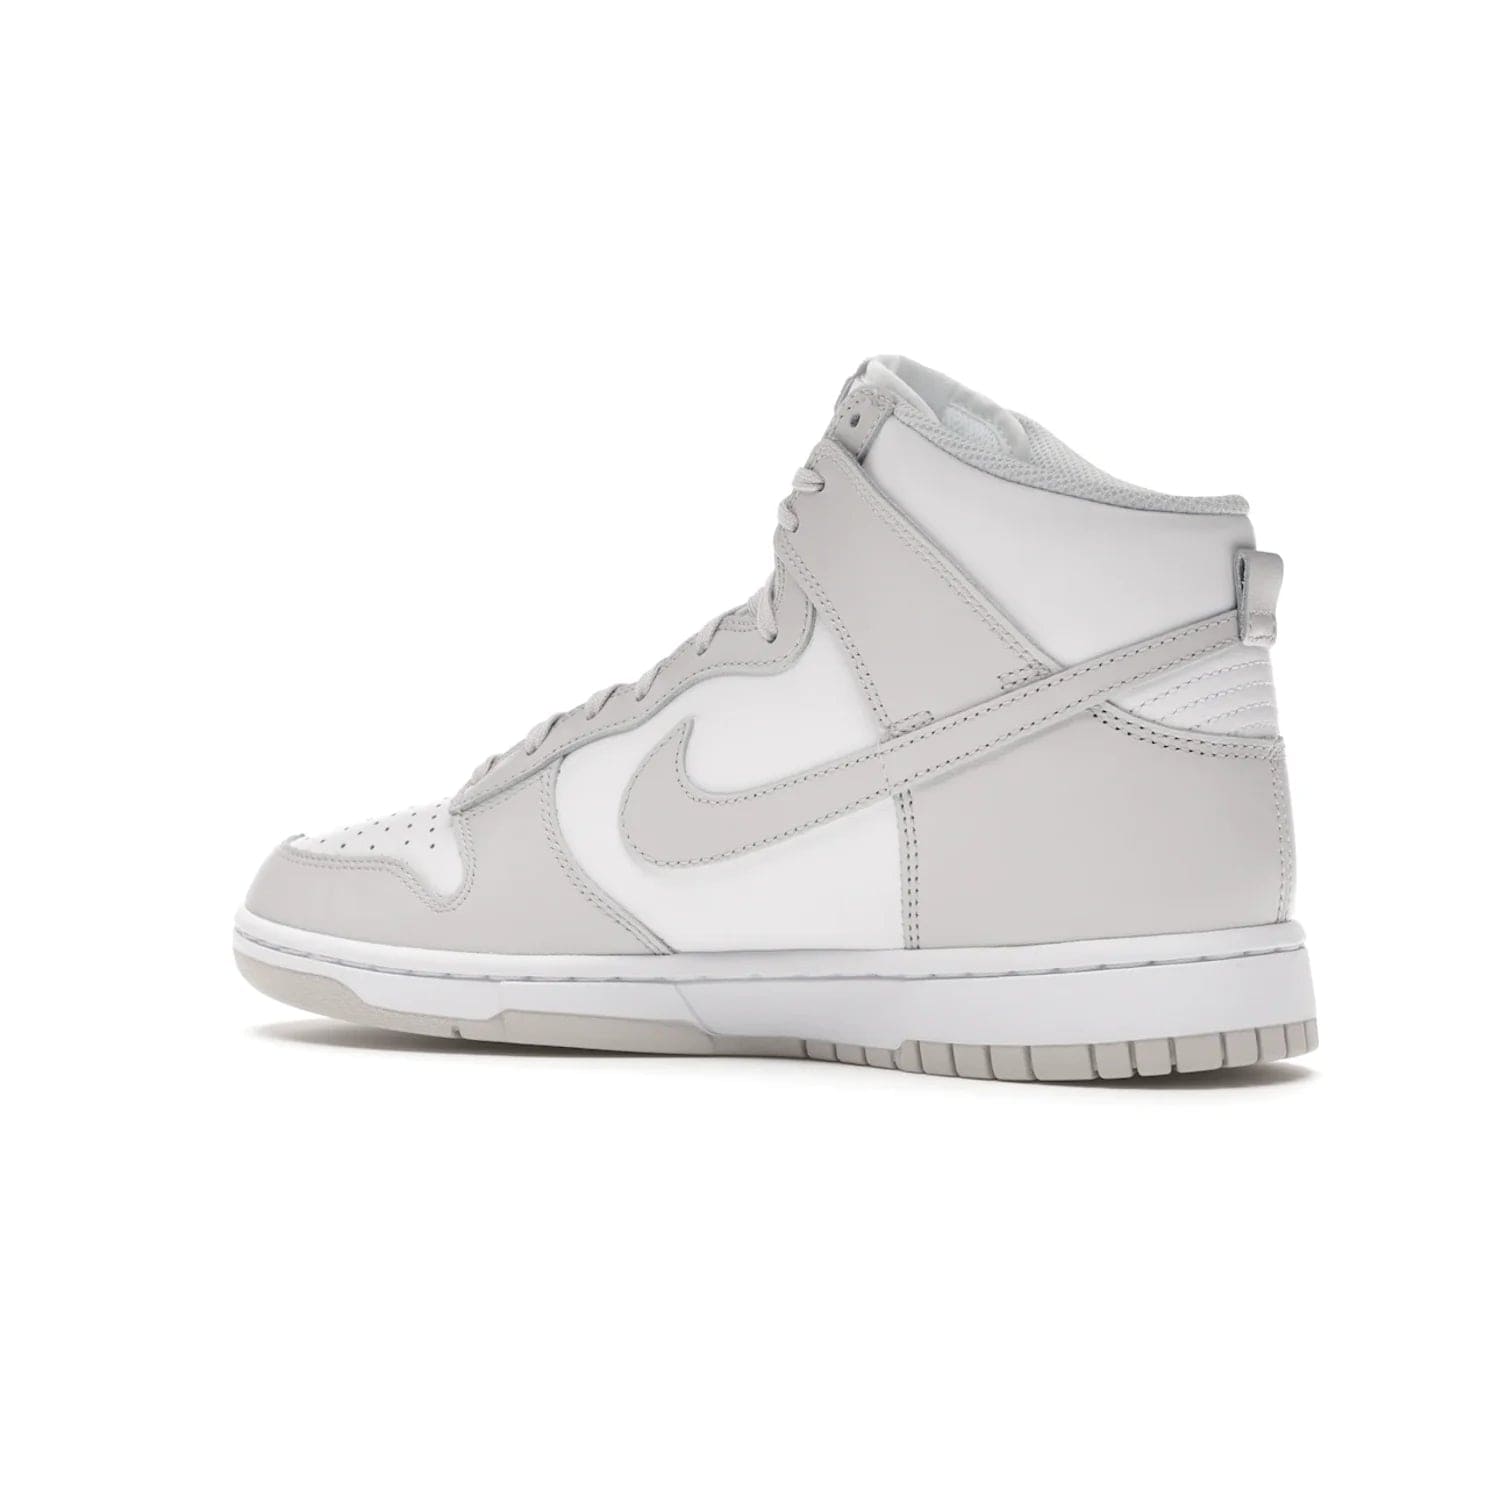 Nike Dunk High Retro White Vast Grey (2021) - Image 22 - Only at www.BallersClubKickz.com - Nike Dunk High Retro White Vast Grey 2021: classic '80s basketball sneaker with a crisp white base, grey overlays, midsole tooling and outsole. Dropped Feb. 2021.